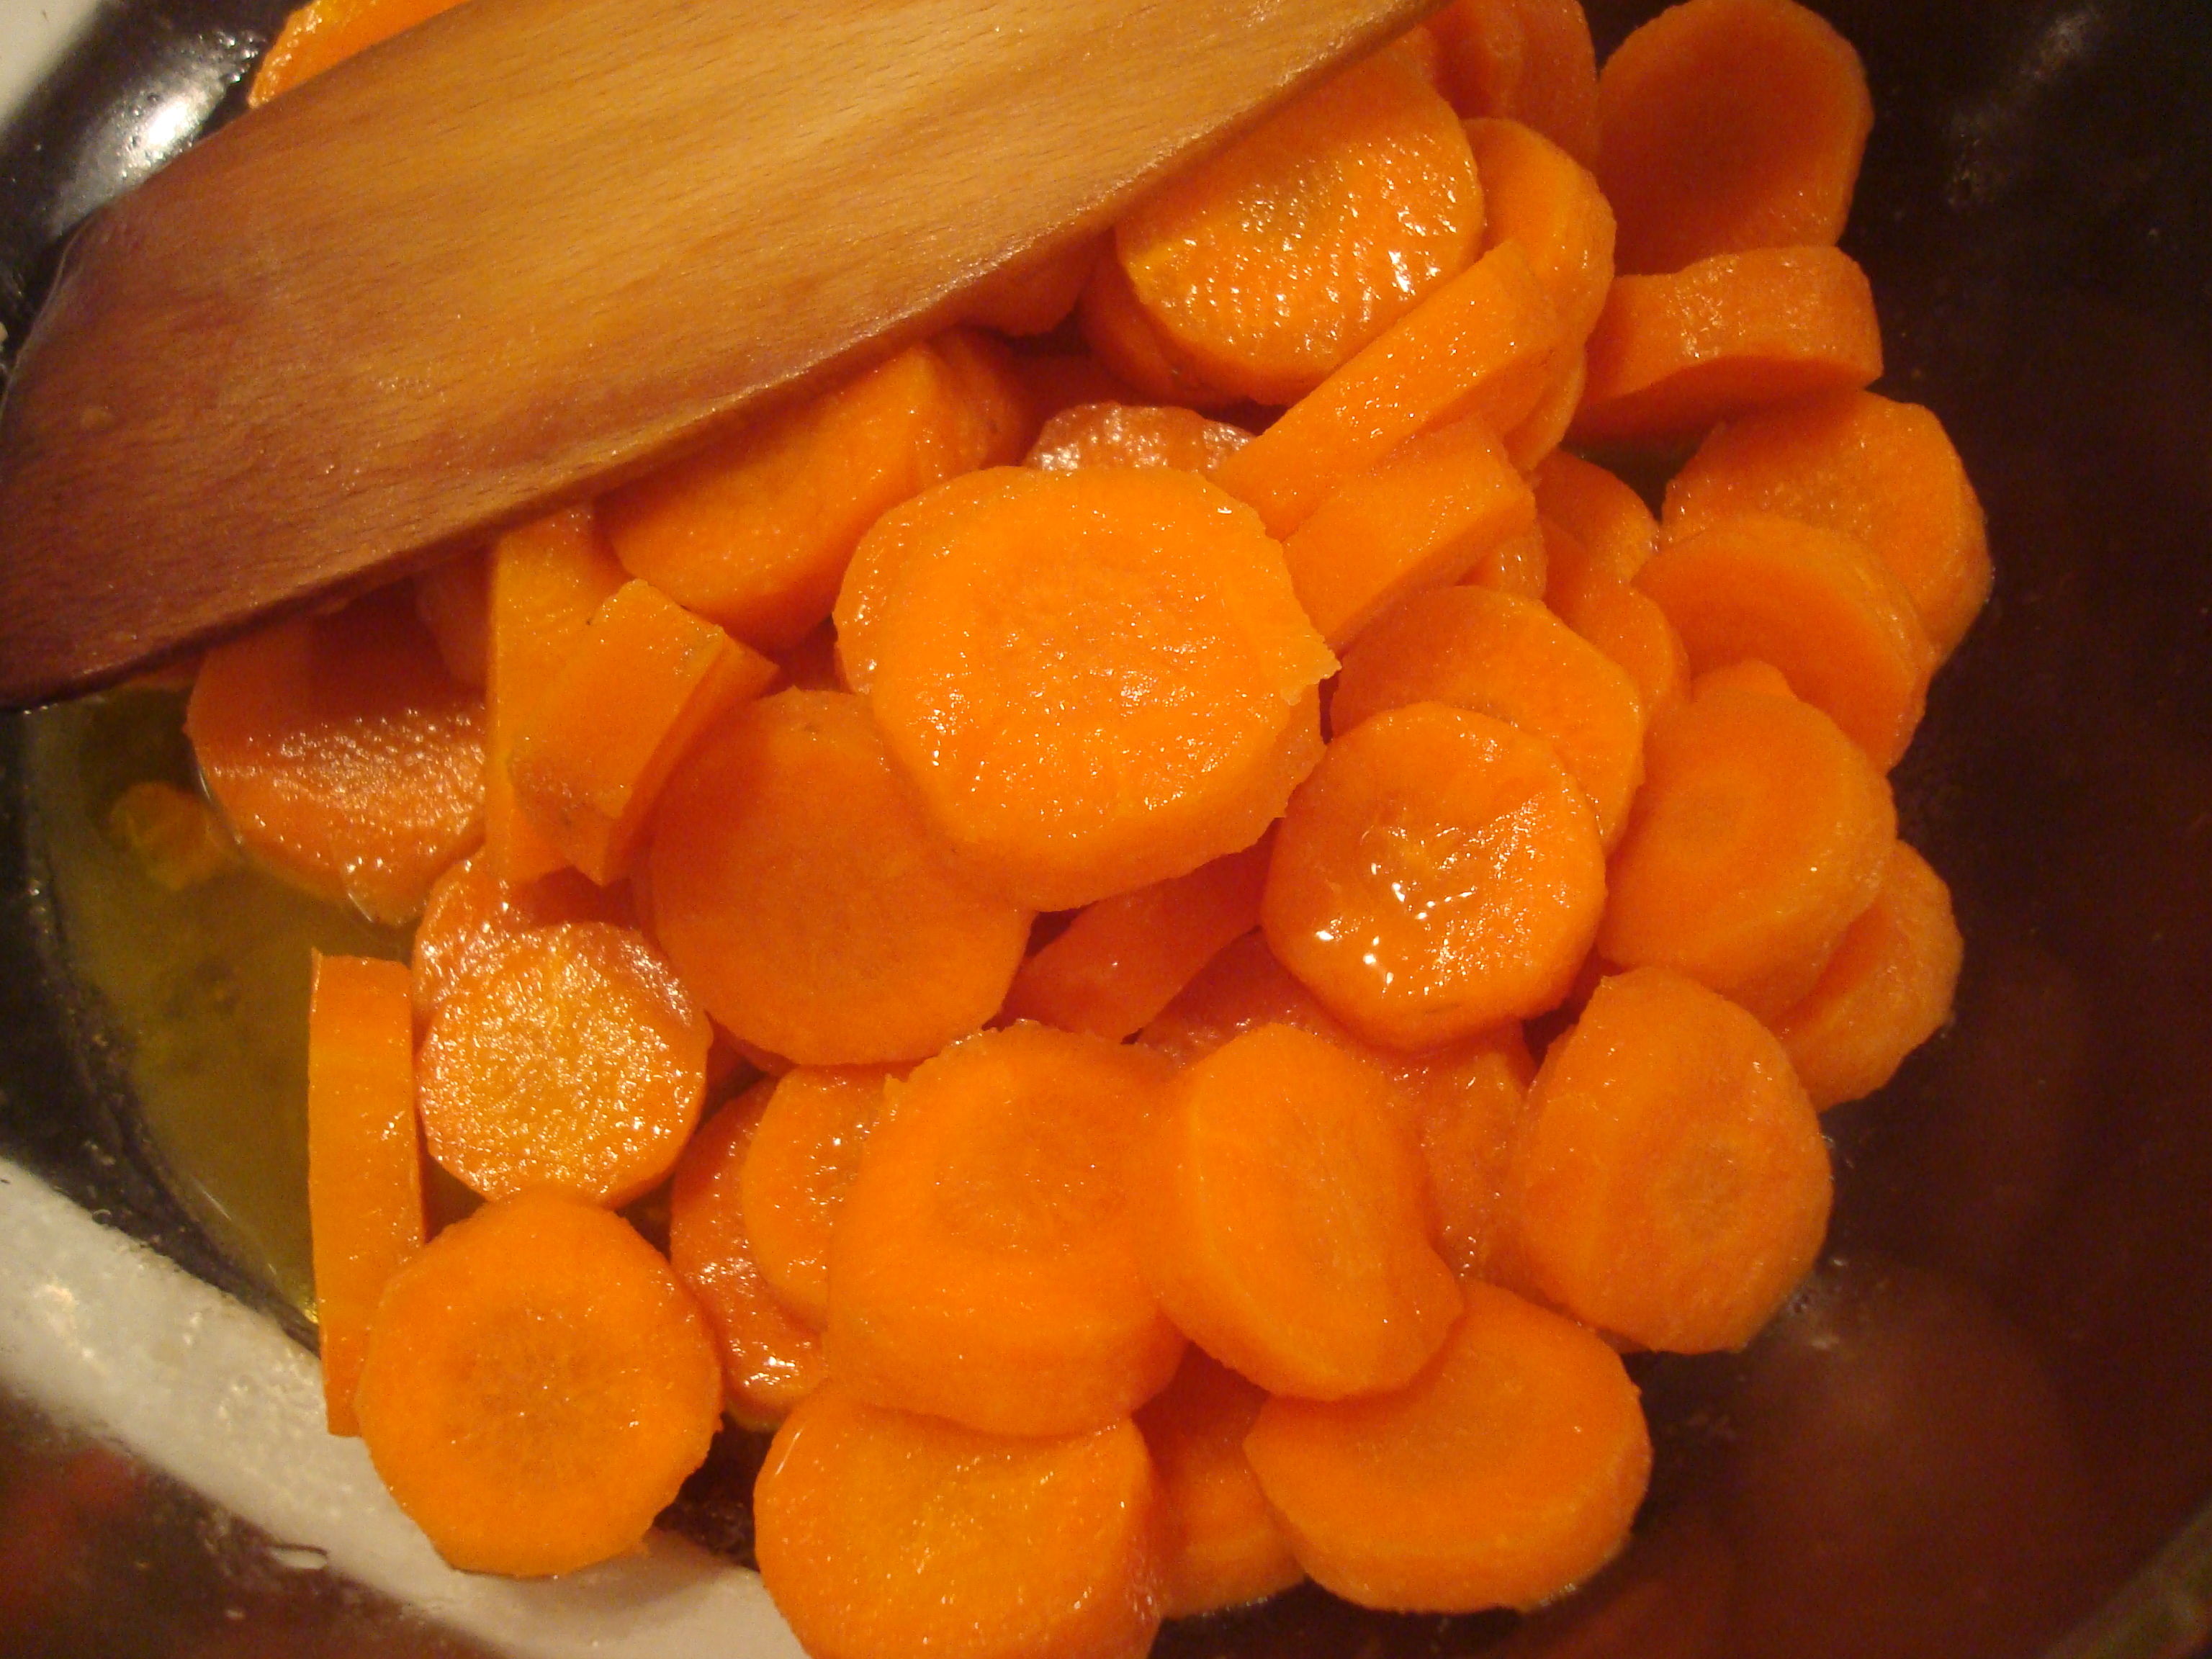 Cooking carrots, Activity, Carrots, Cooking, Eating, HQ Photo